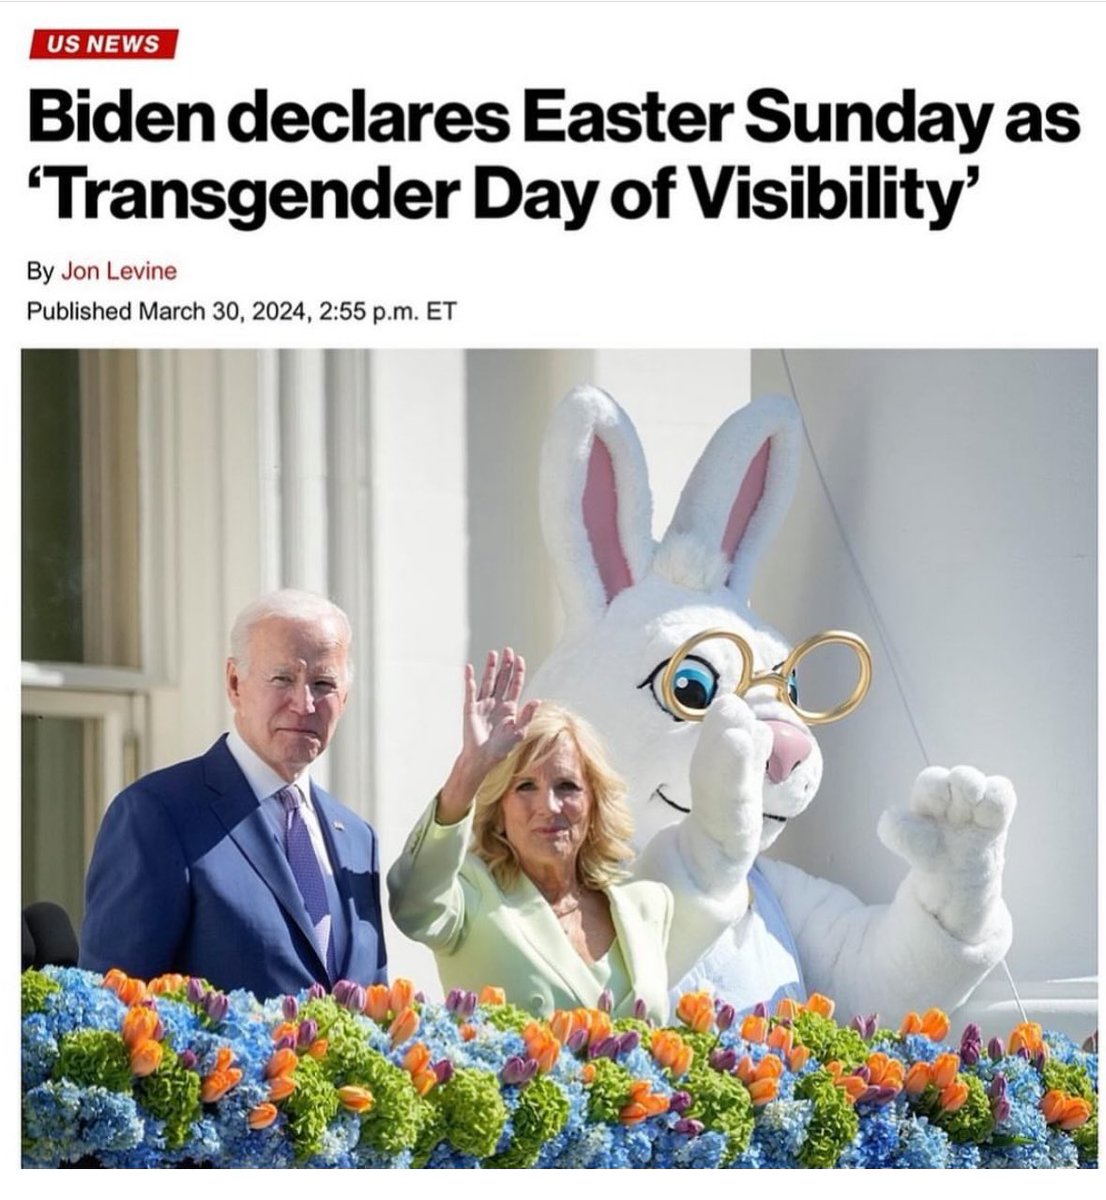 This is really hard to believe. President Biden issued a proclamation recognizing March 31 as Transgender Day of Visibility. This is also the date of Easter where we celebrate the fact that Jesus Christ rose from the dead. What is the president thinking? This is a profound